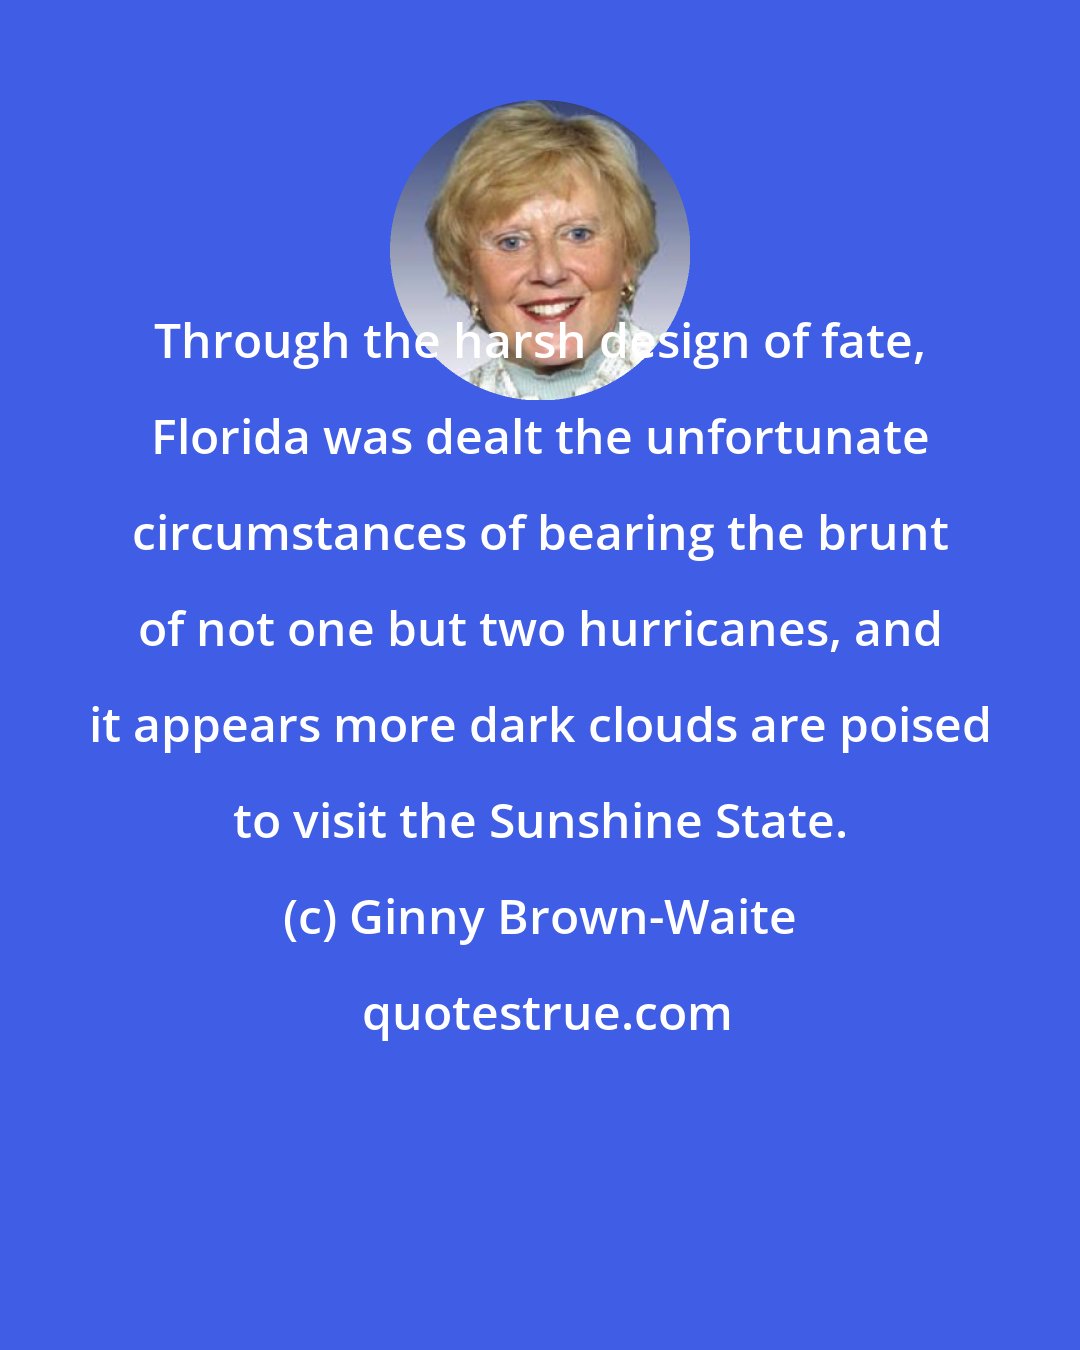 Ginny Brown-Waite: Through the harsh design of fate, Florida was dealt the unfortunate circumstances of bearing the brunt of not one but two hurricanes, and it appears more dark clouds are poised to visit the Sunshine State.